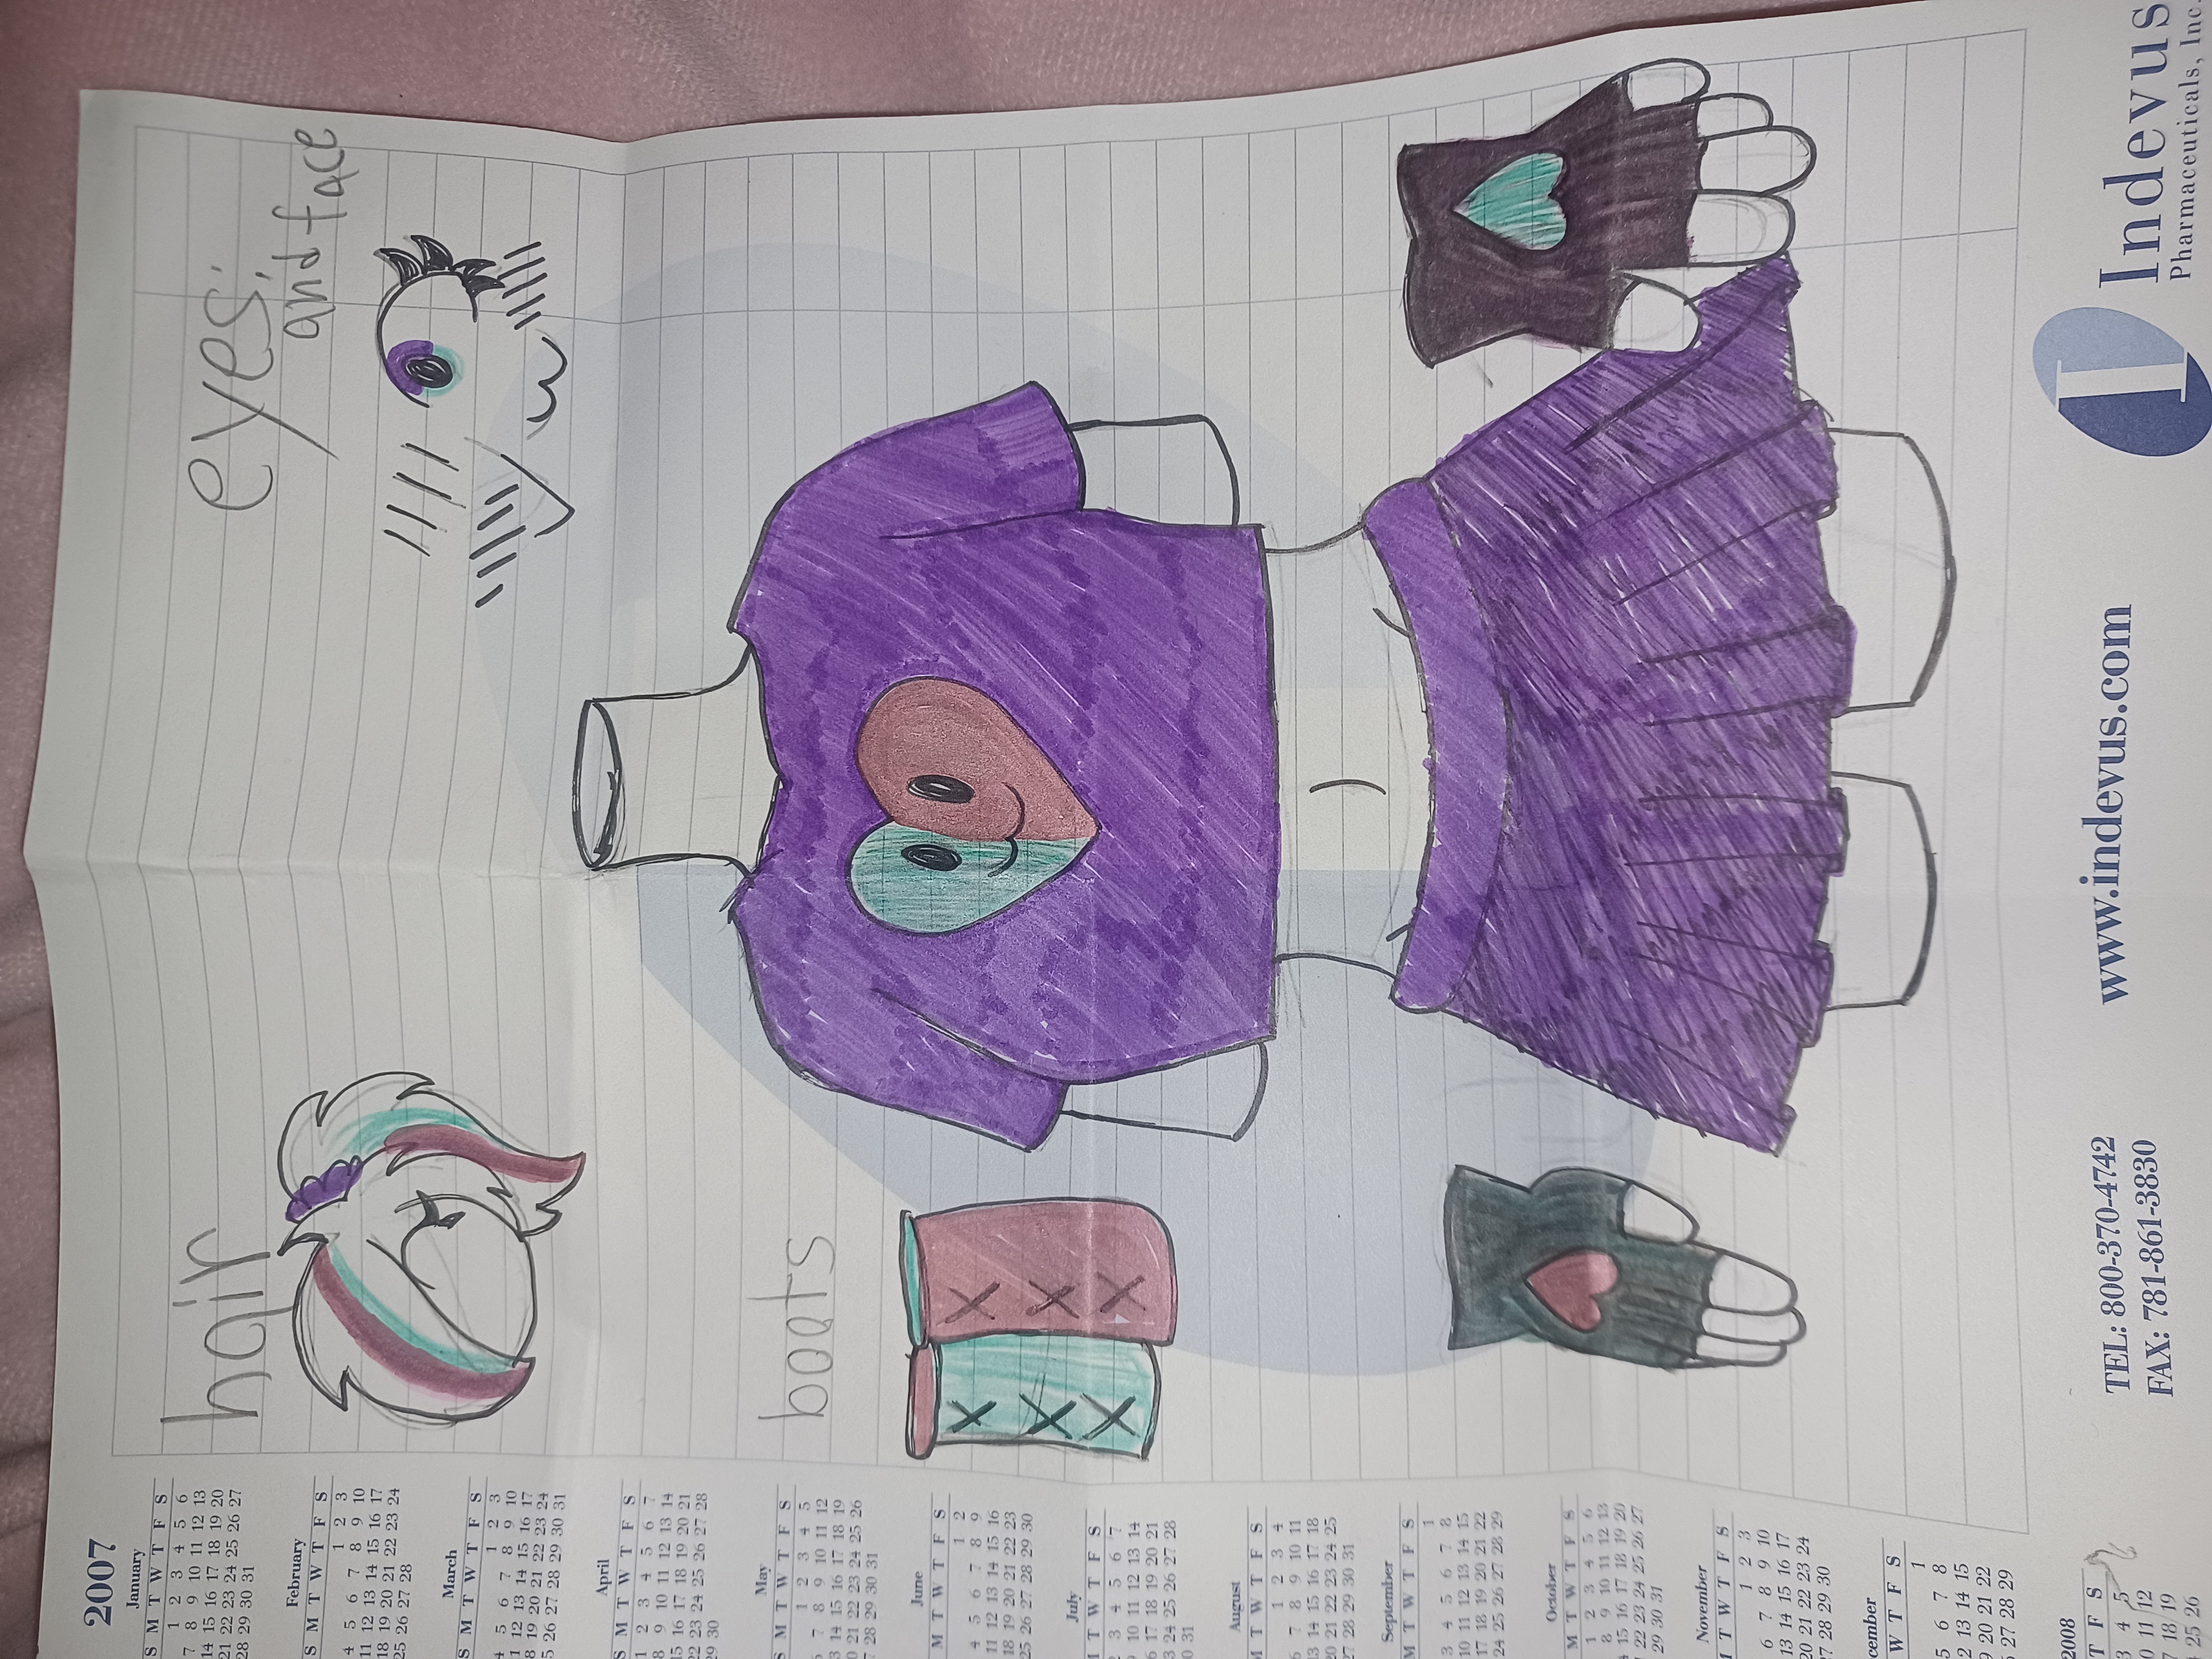 Another Roblox drawing by KittyZoidx on DeviantArt